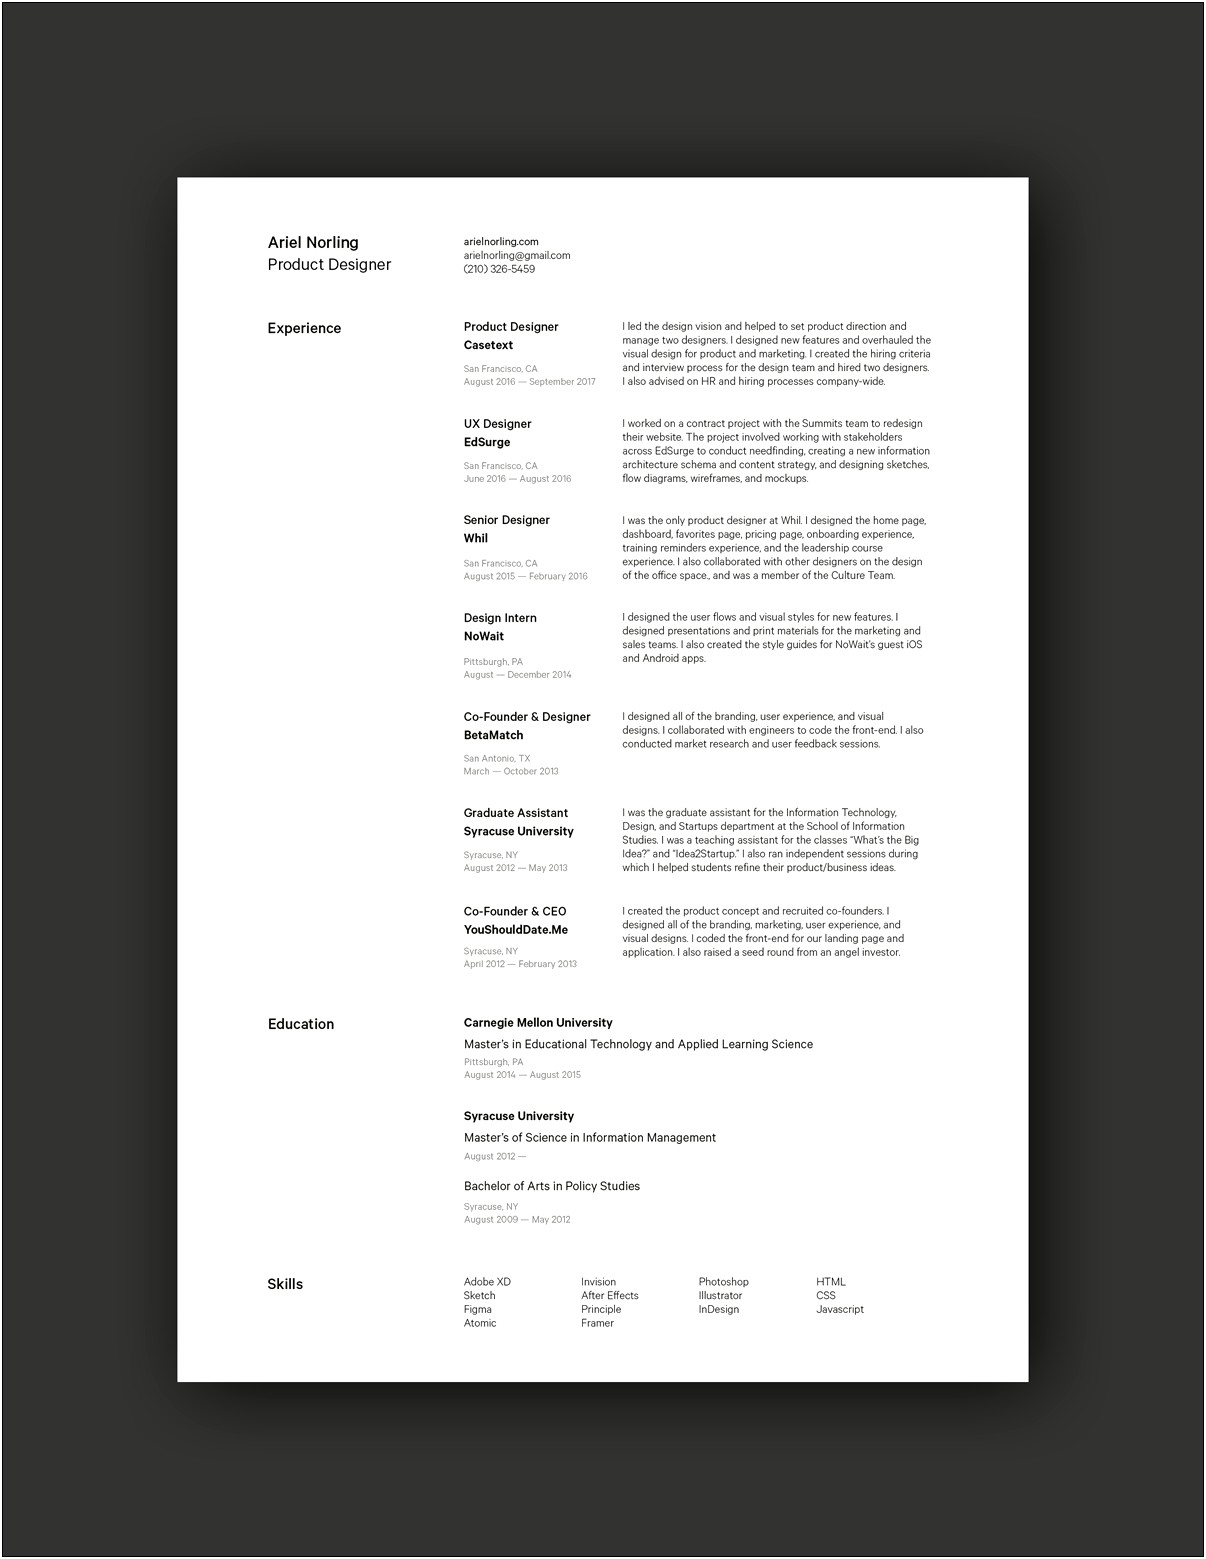 Are Links In Resumes A Good Idea